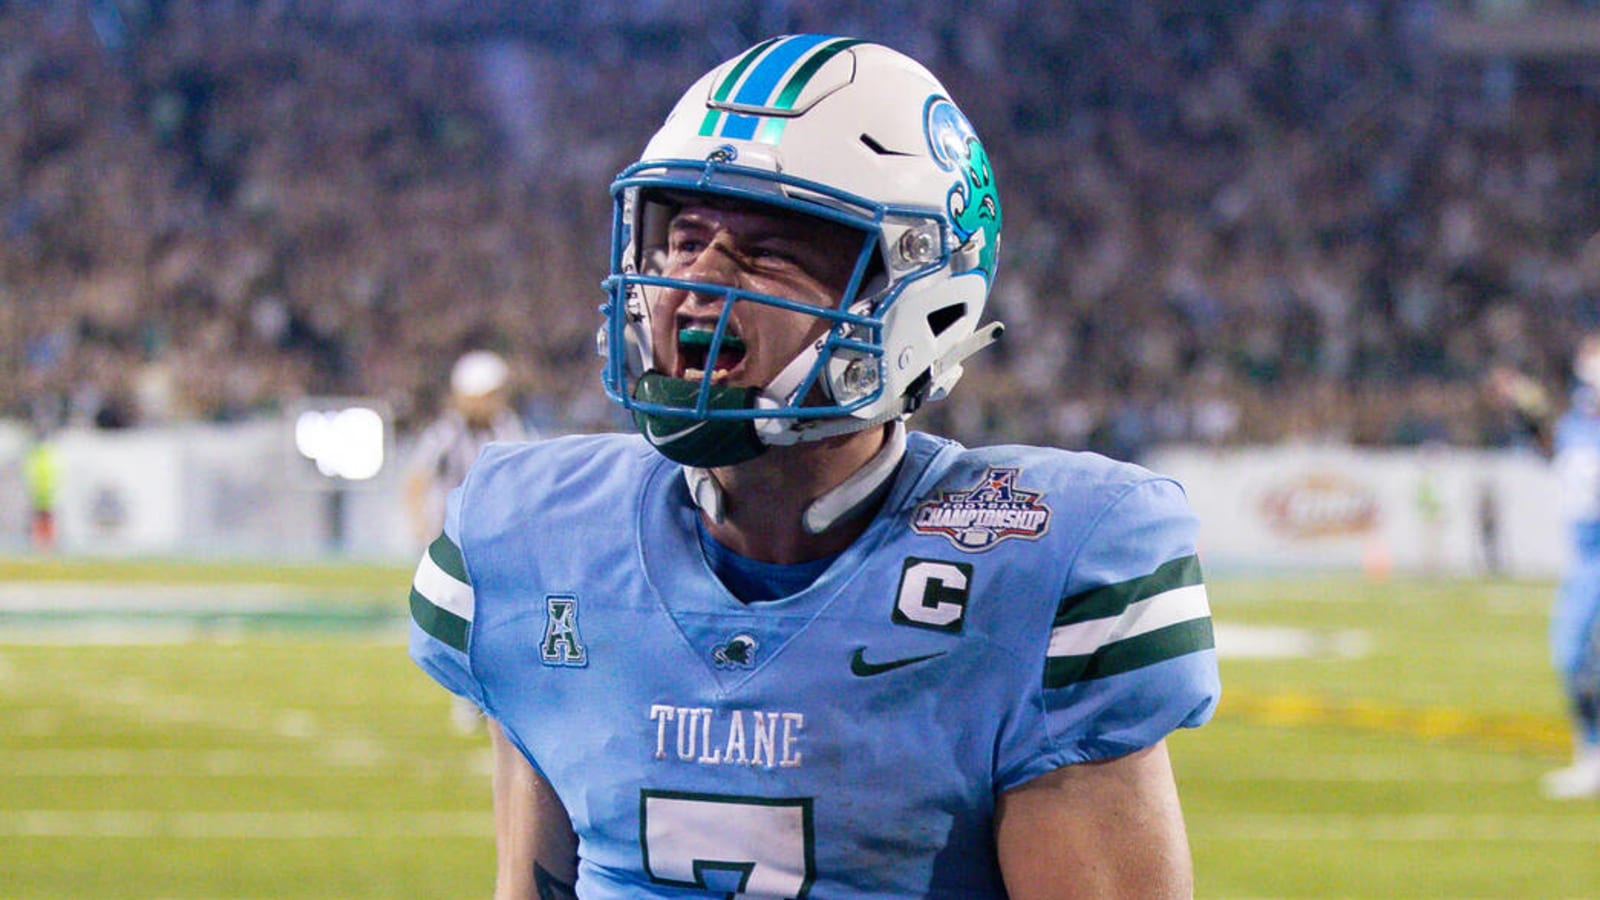 Could Tulane crash the College Football Playoff?